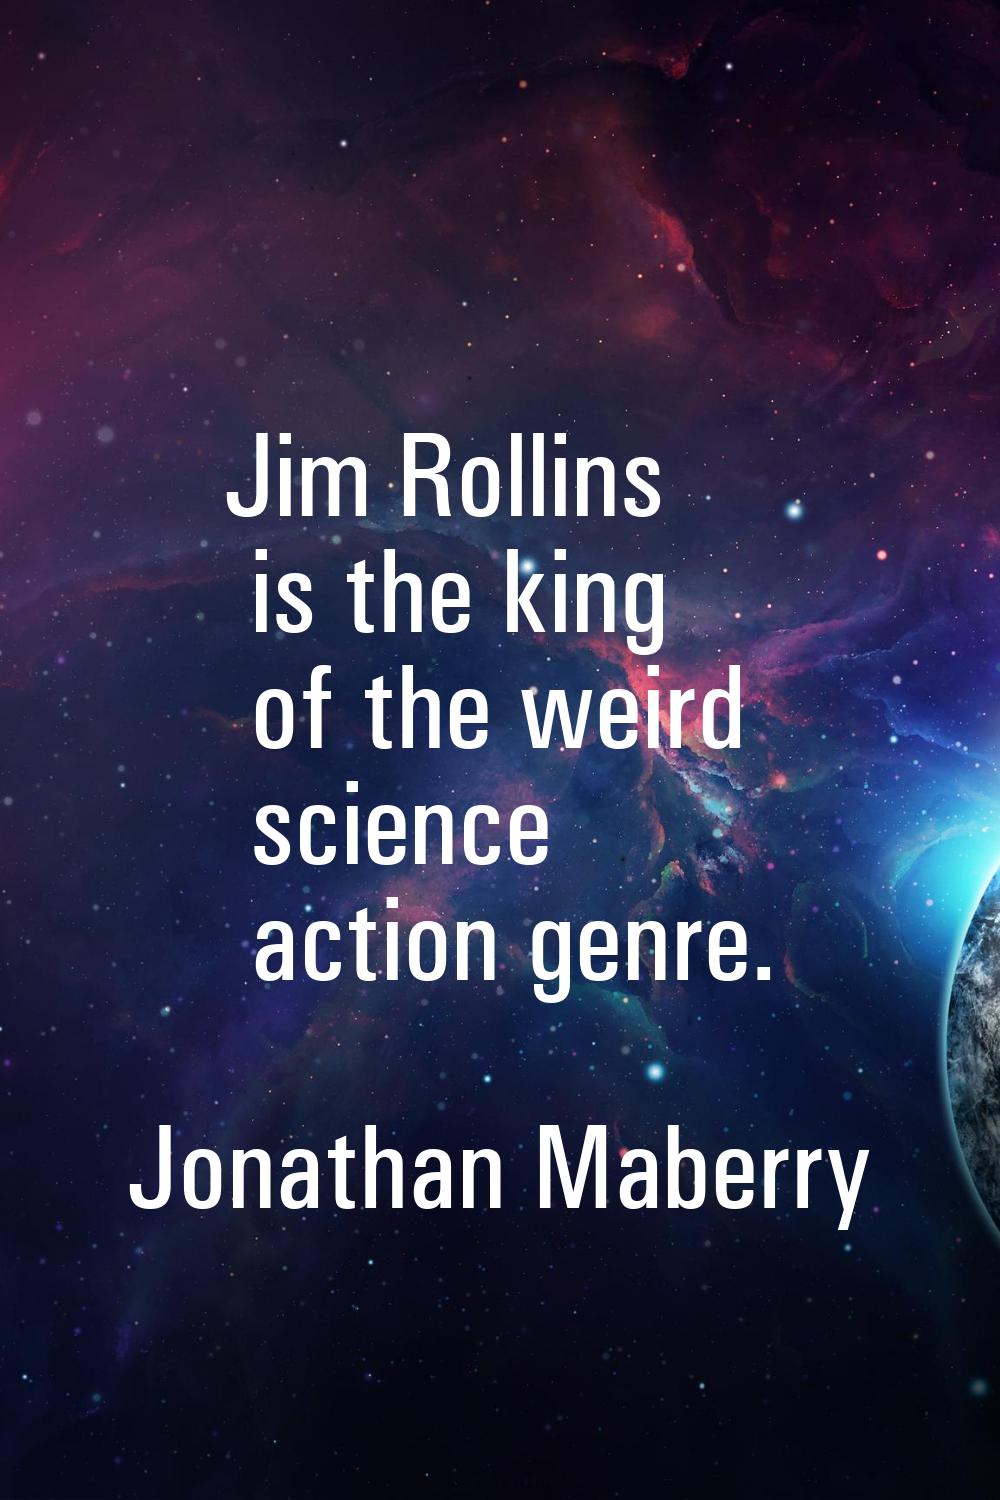 Jim Rollins is the king of the weird science action genre.